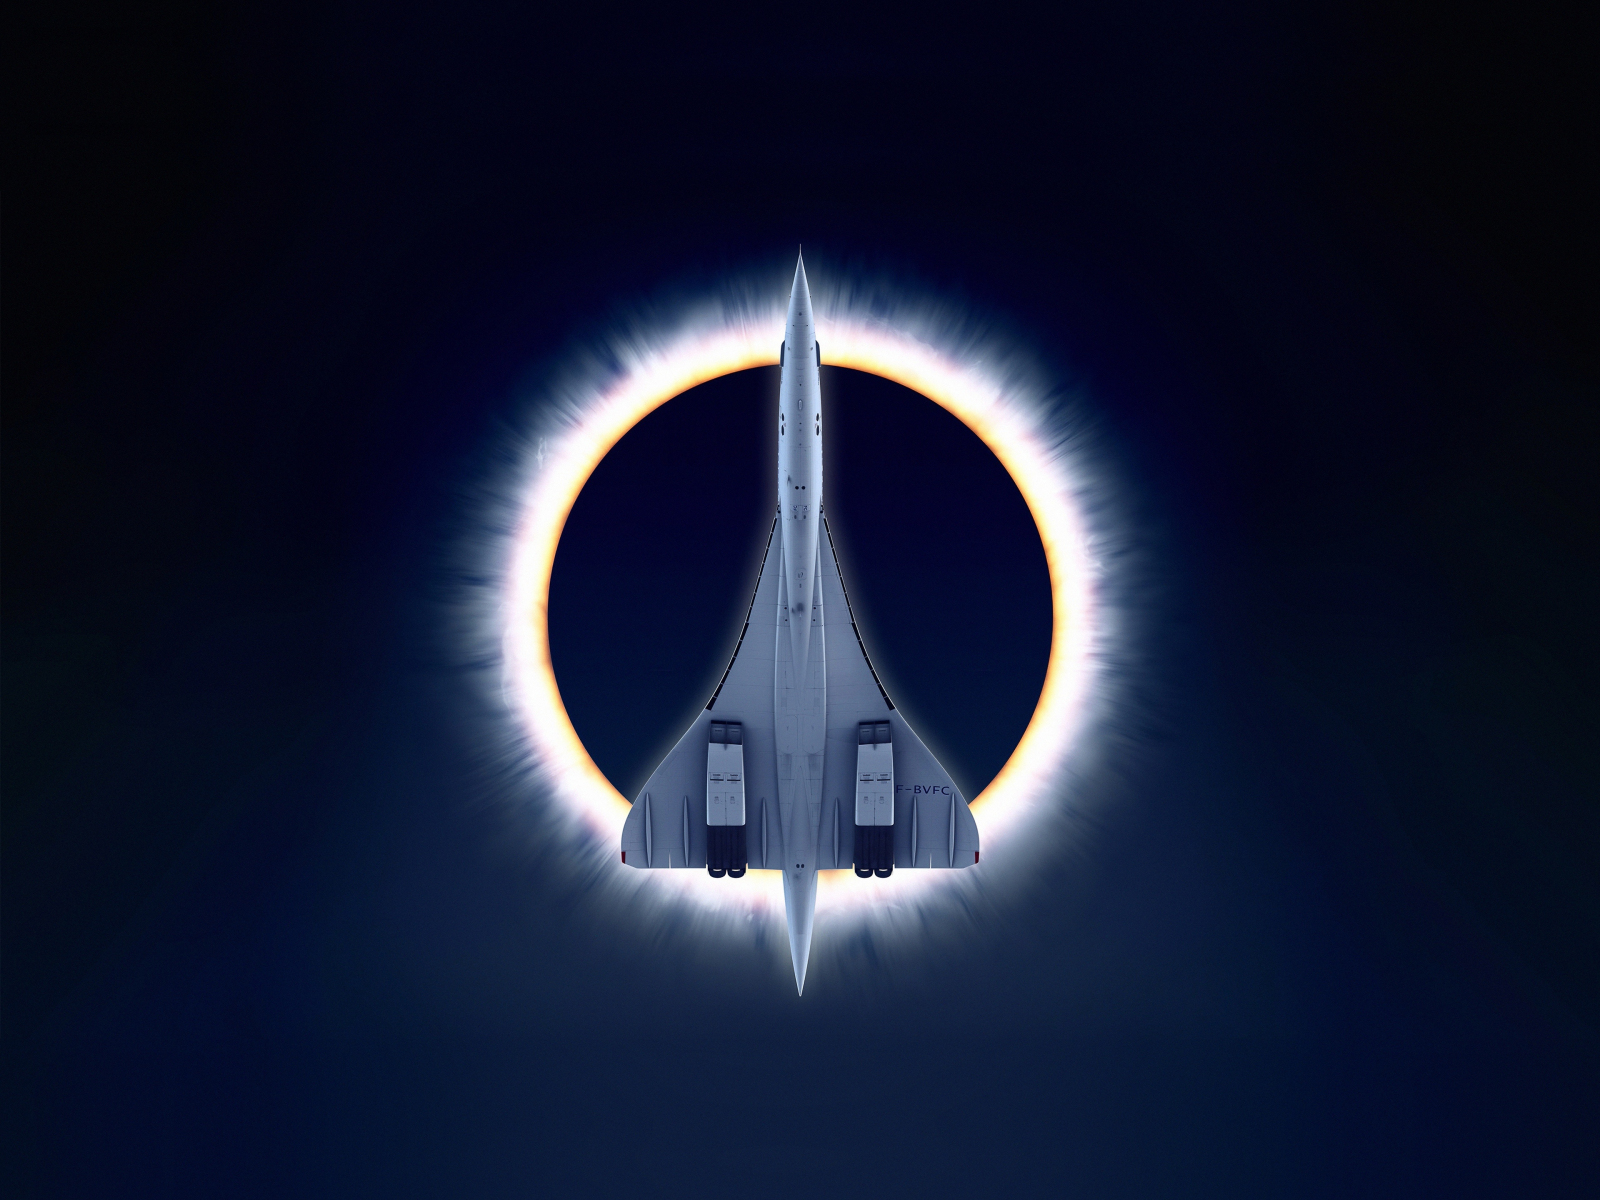 Concorde Carre, eclipse, airplane, moon, aircraft, 1600x1200 wallpaper